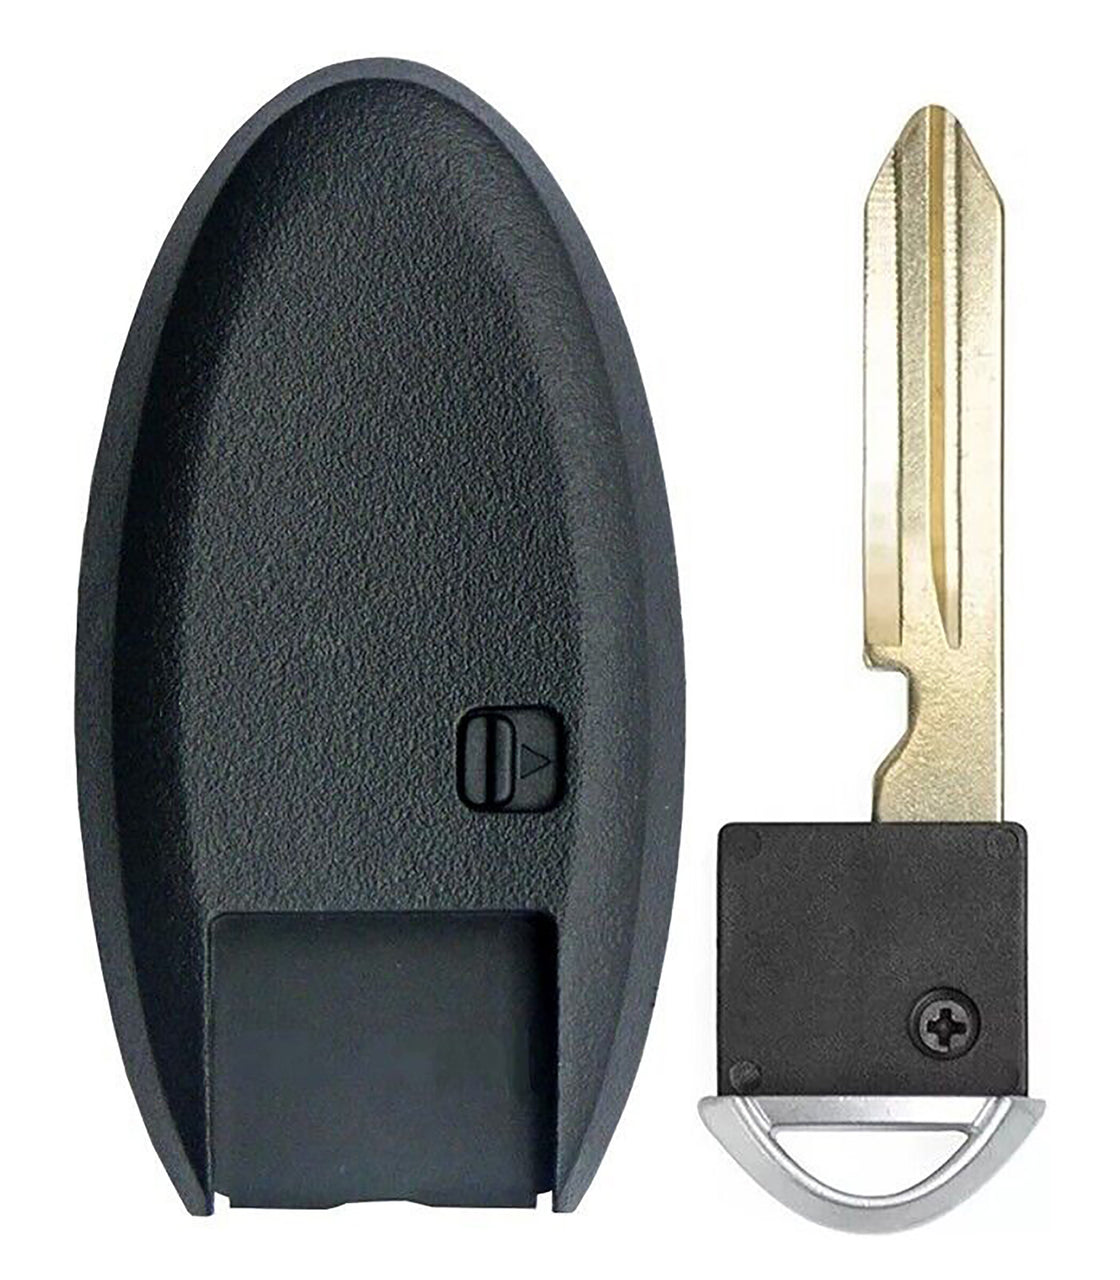 1x New Replacement Proximity Key Fob Compatible with & Fit For Infiniti. Read Description - MPN CWTWB1U787-02